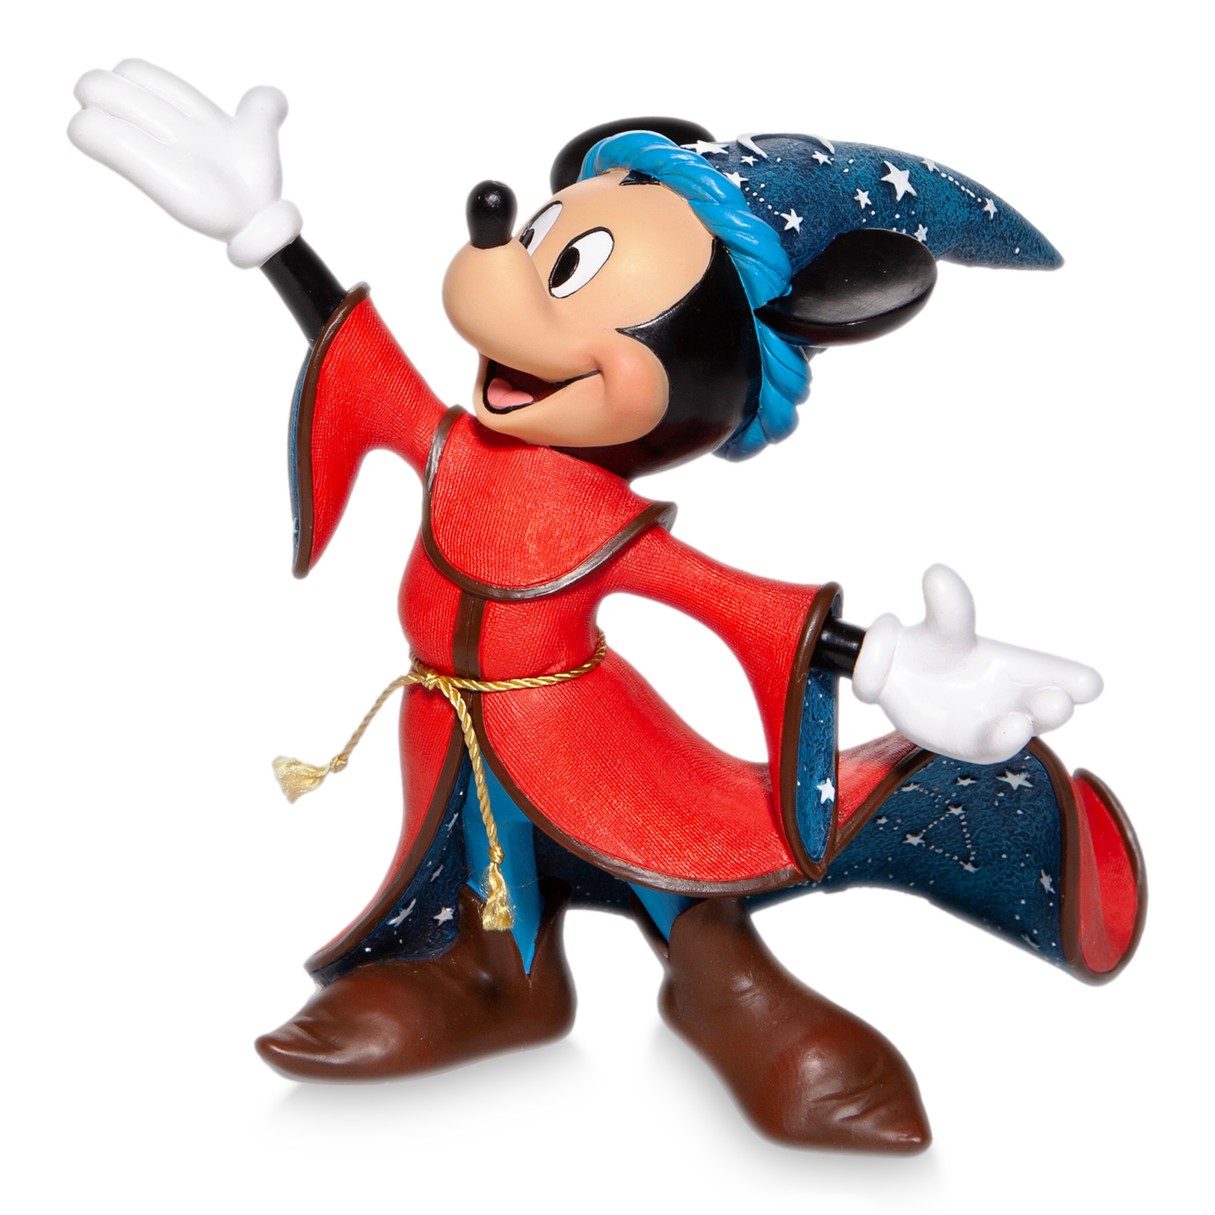 The Sorcerer Mickey Statue is Back in Stock! 